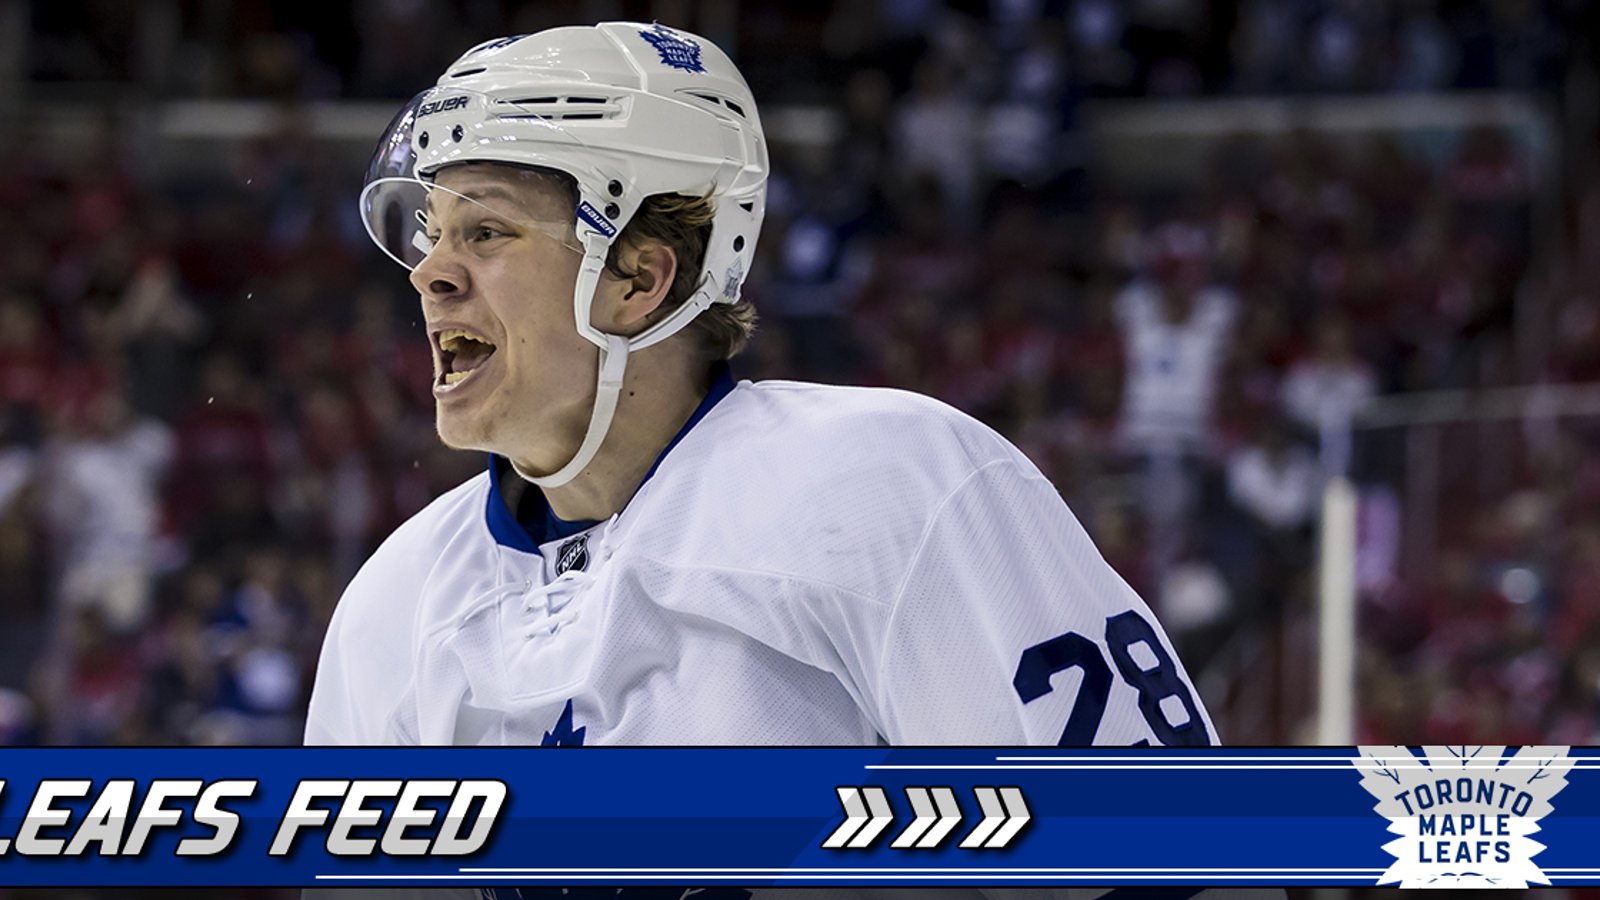 Leafs prospects watch: Kapanen and Johnsson are still on fire in the AHL!